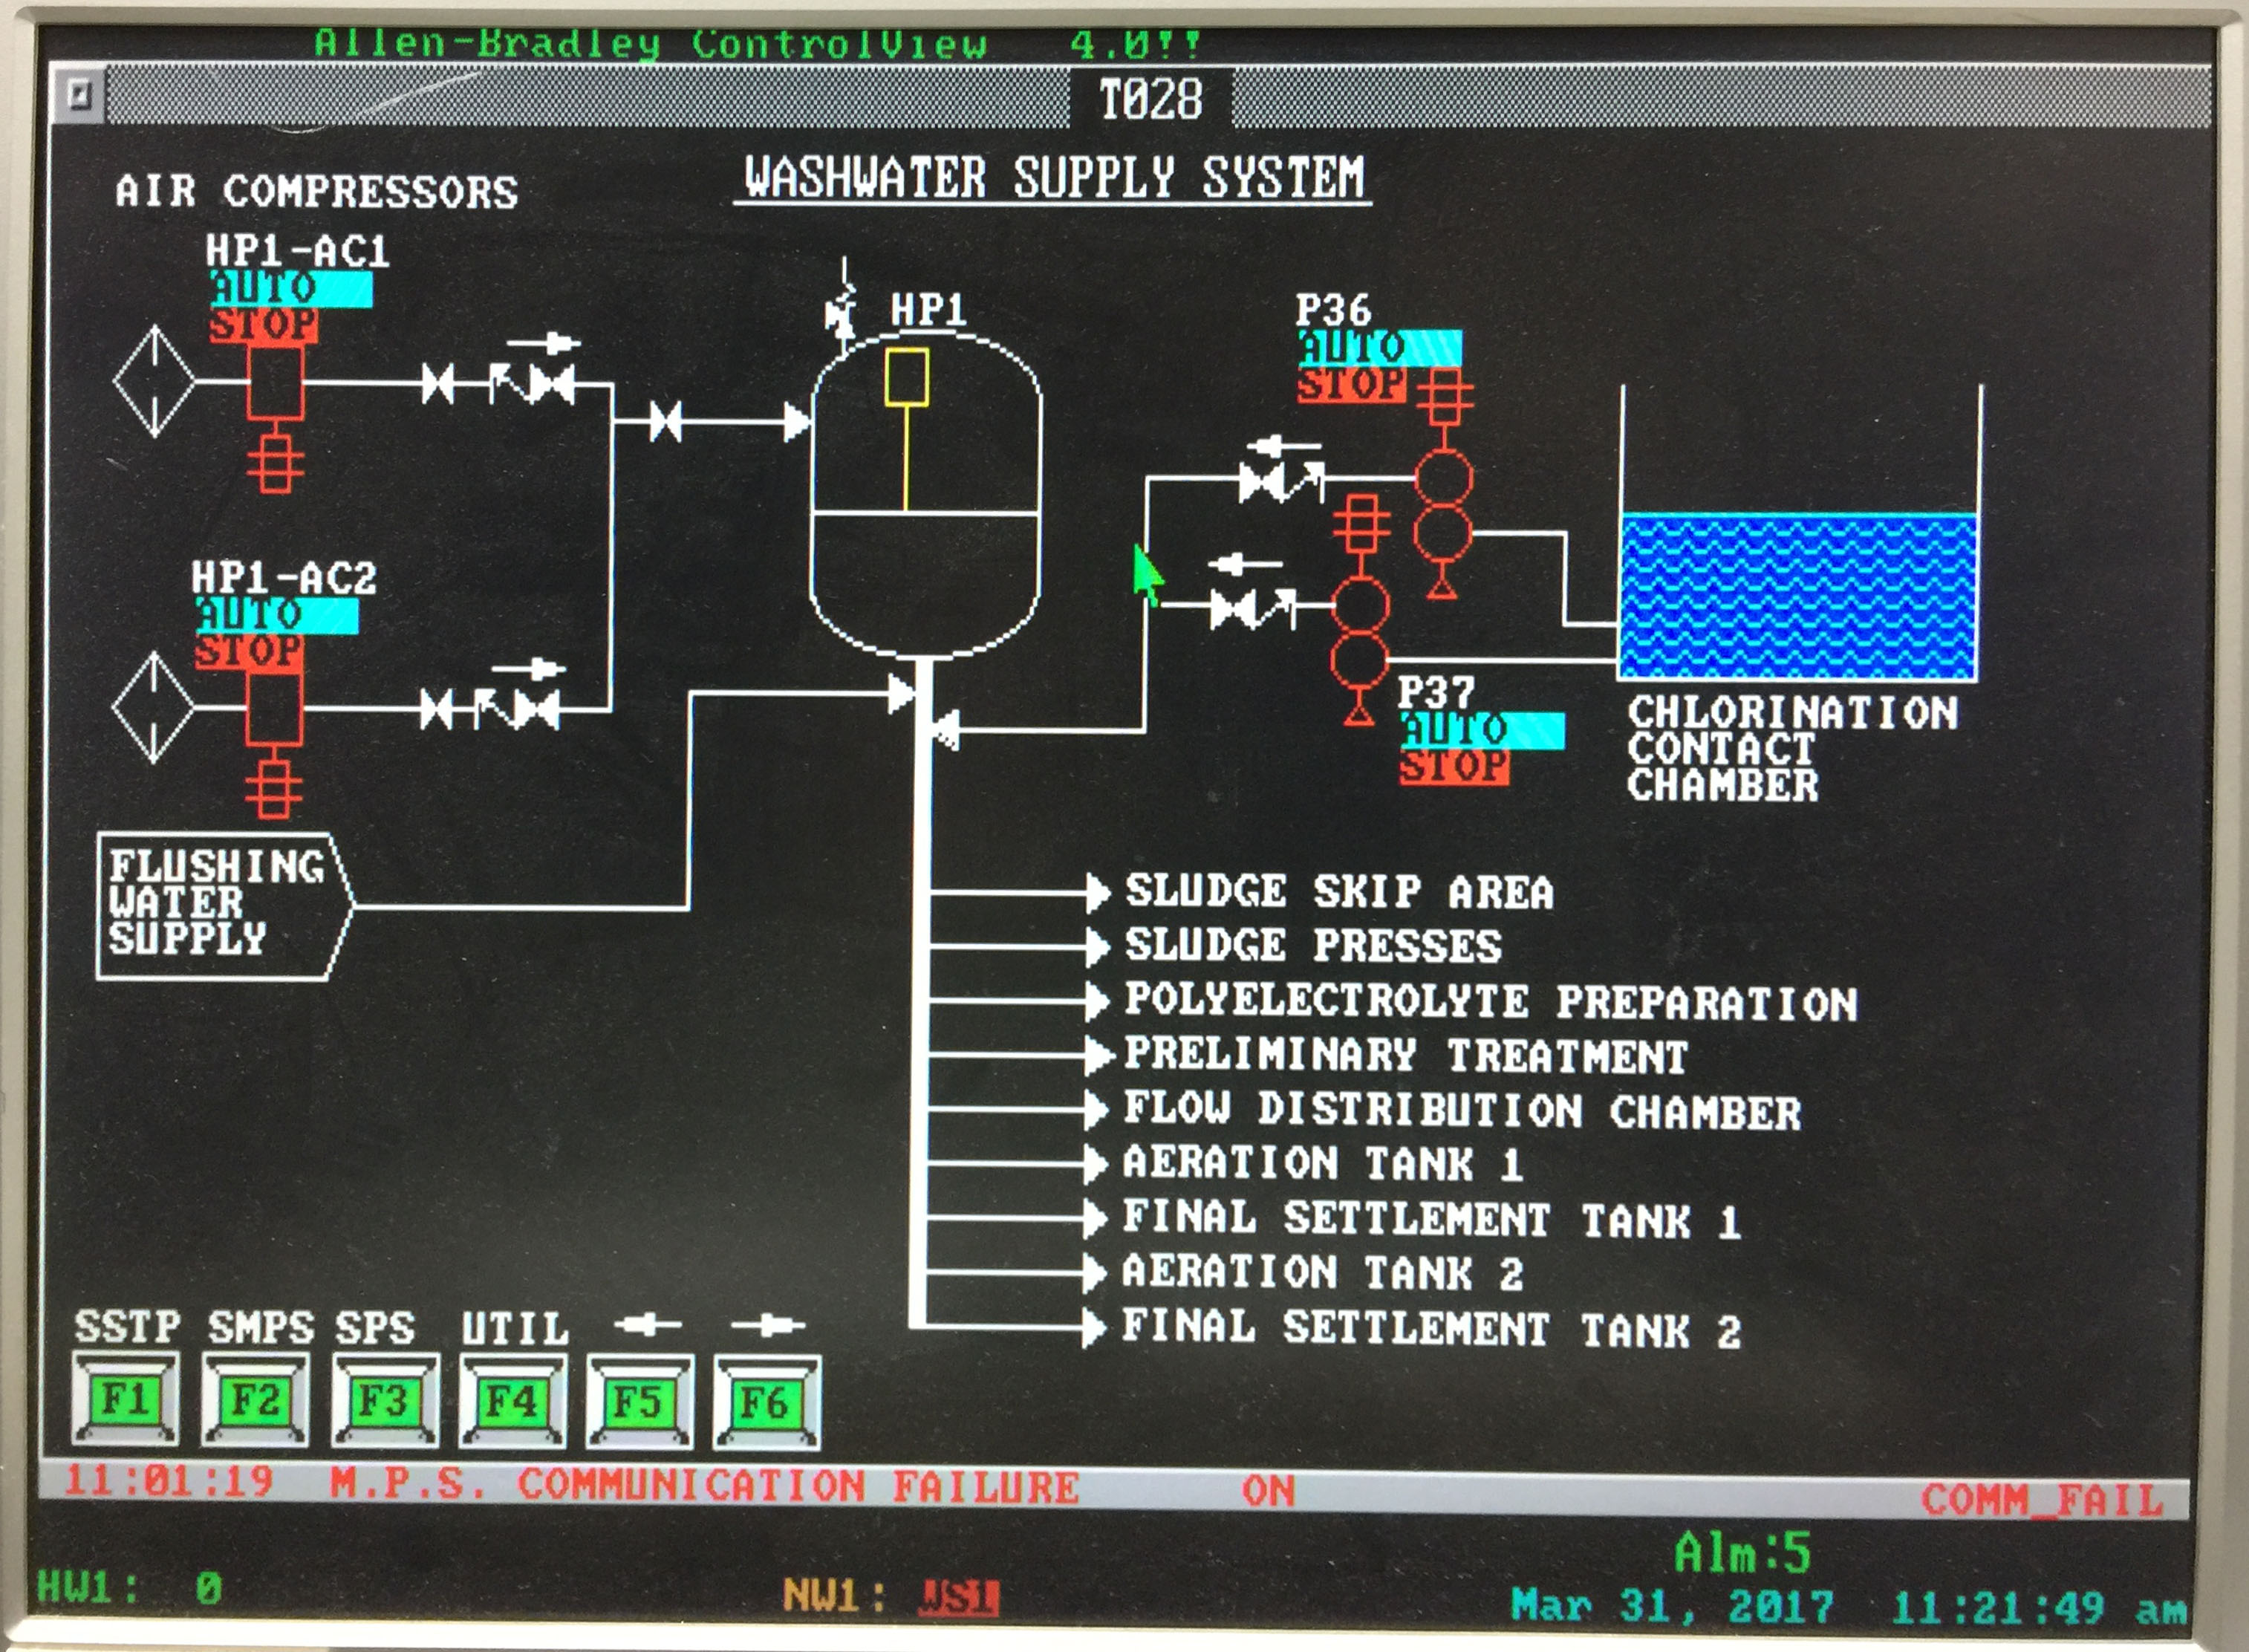 Part of Washwater Supply System screenshot from ControlView Before Works in DSD Stanley STW